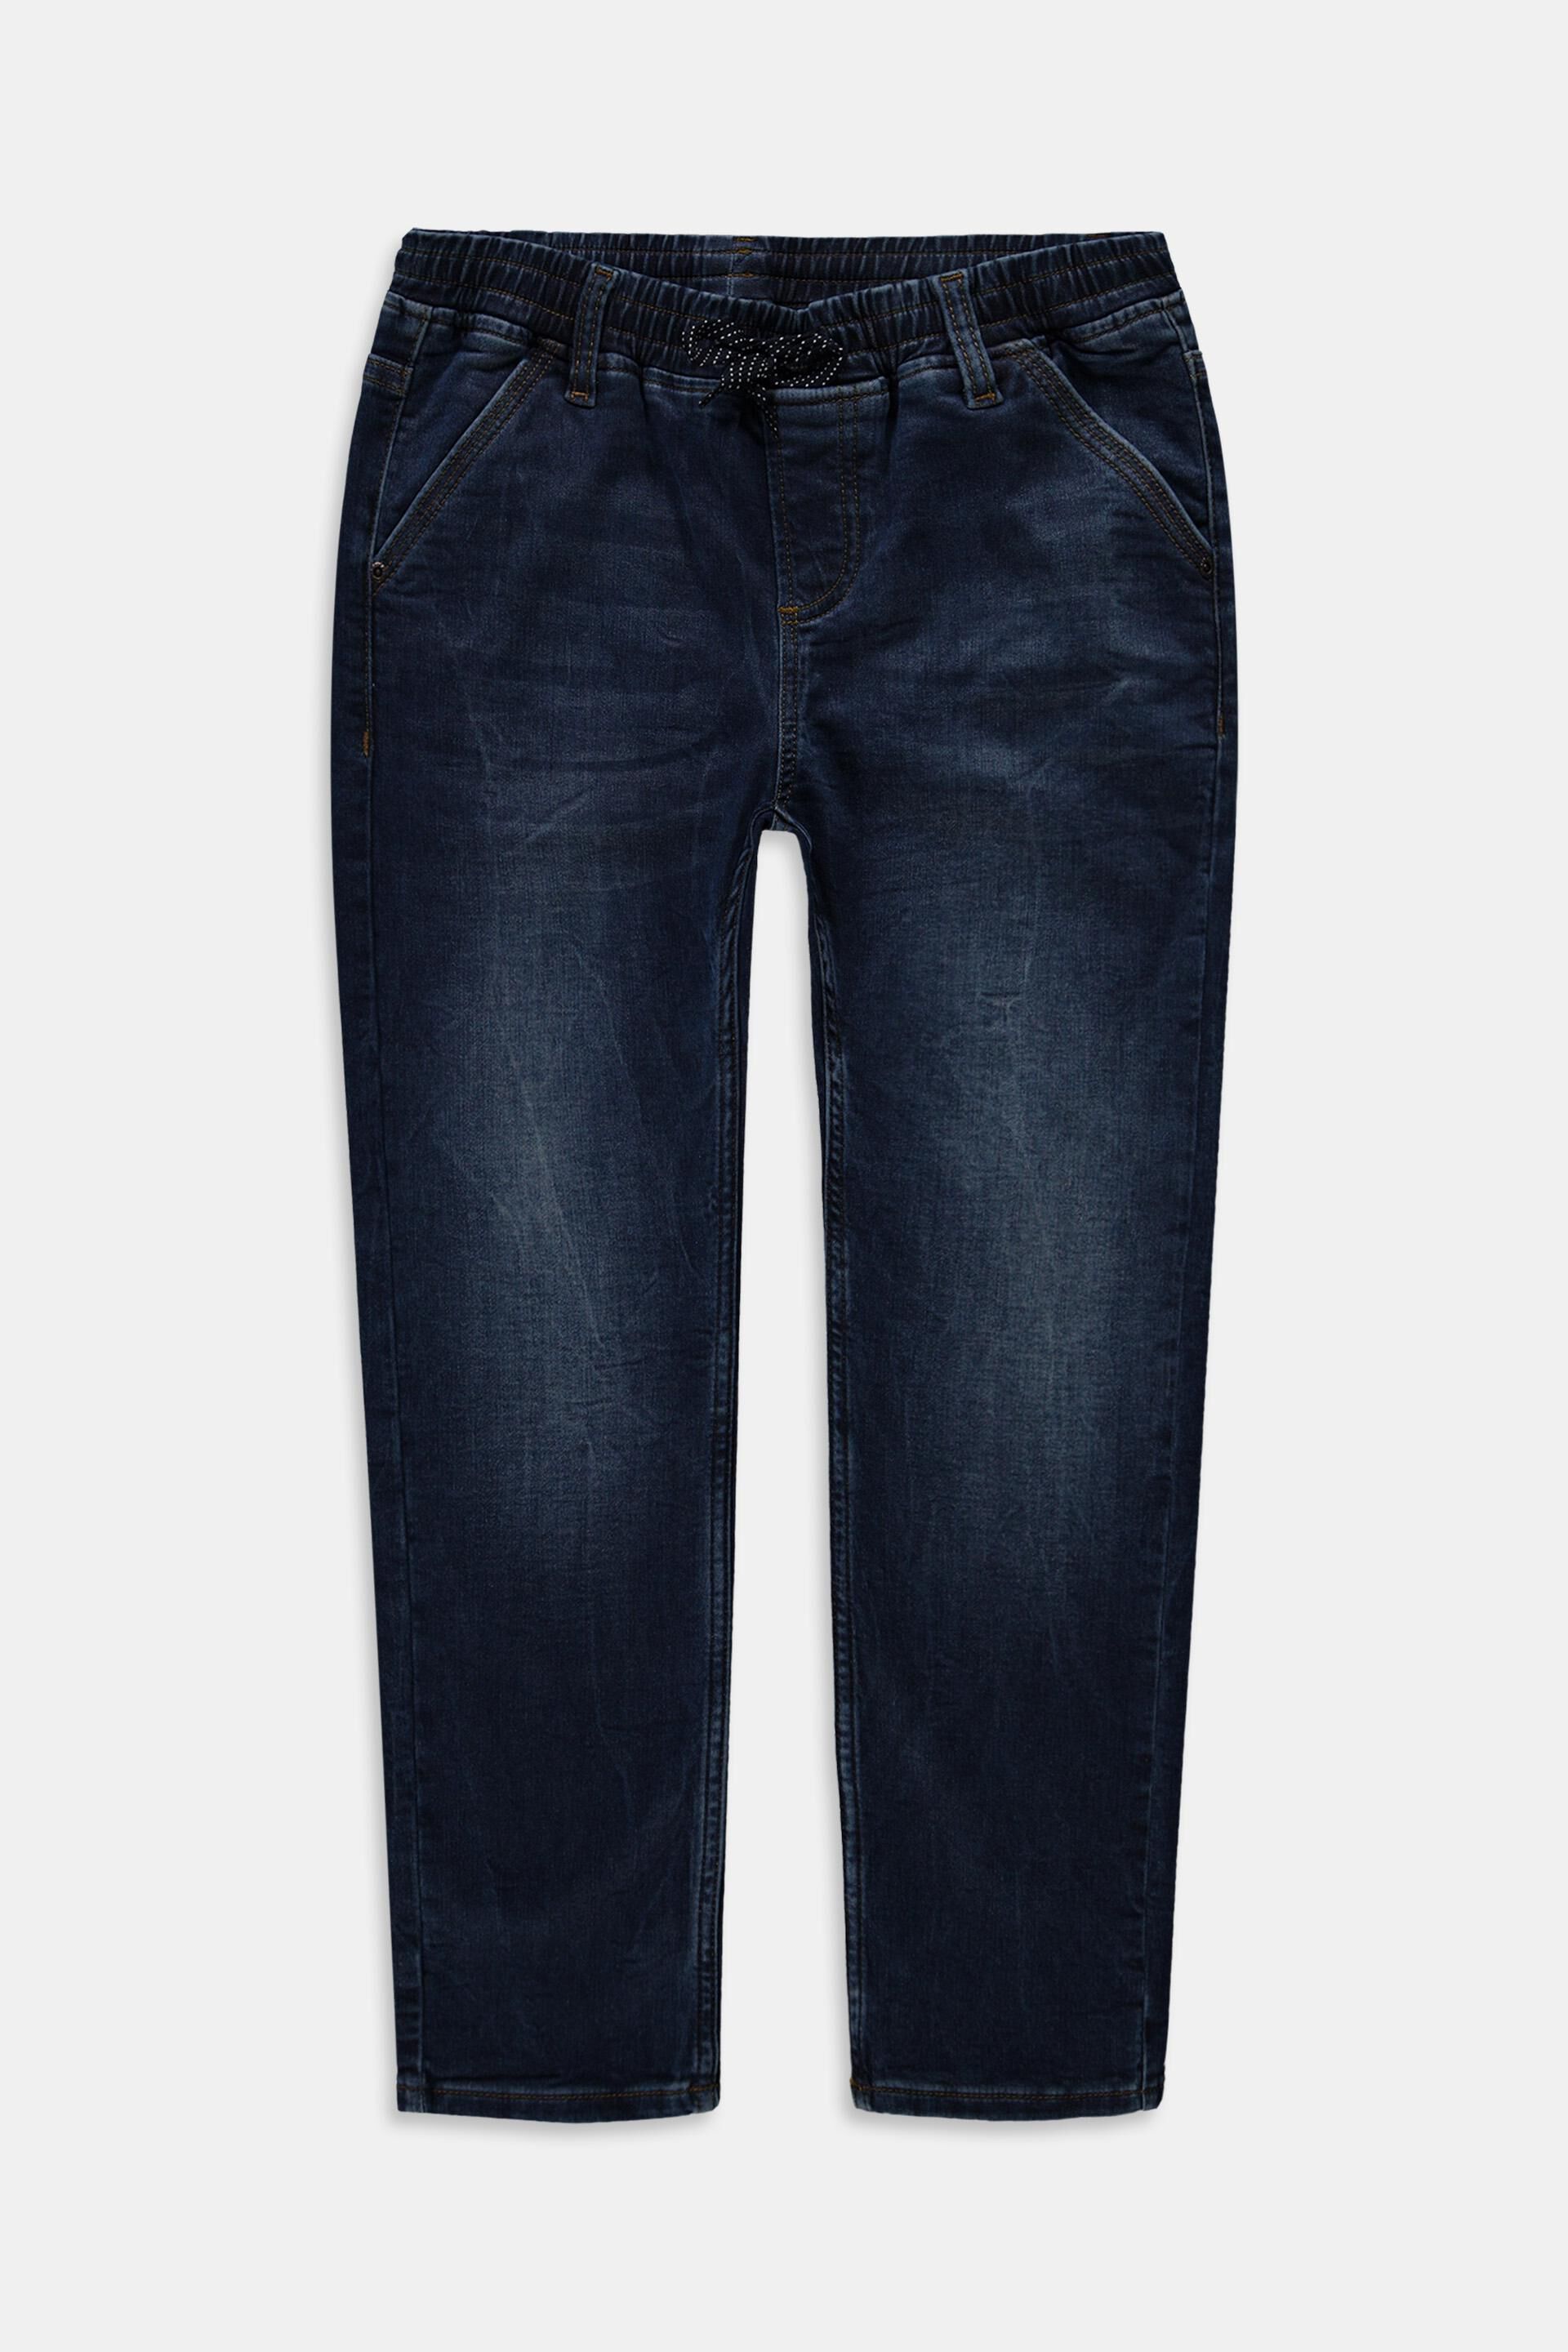 Esprit waistband with Jeans elasticated